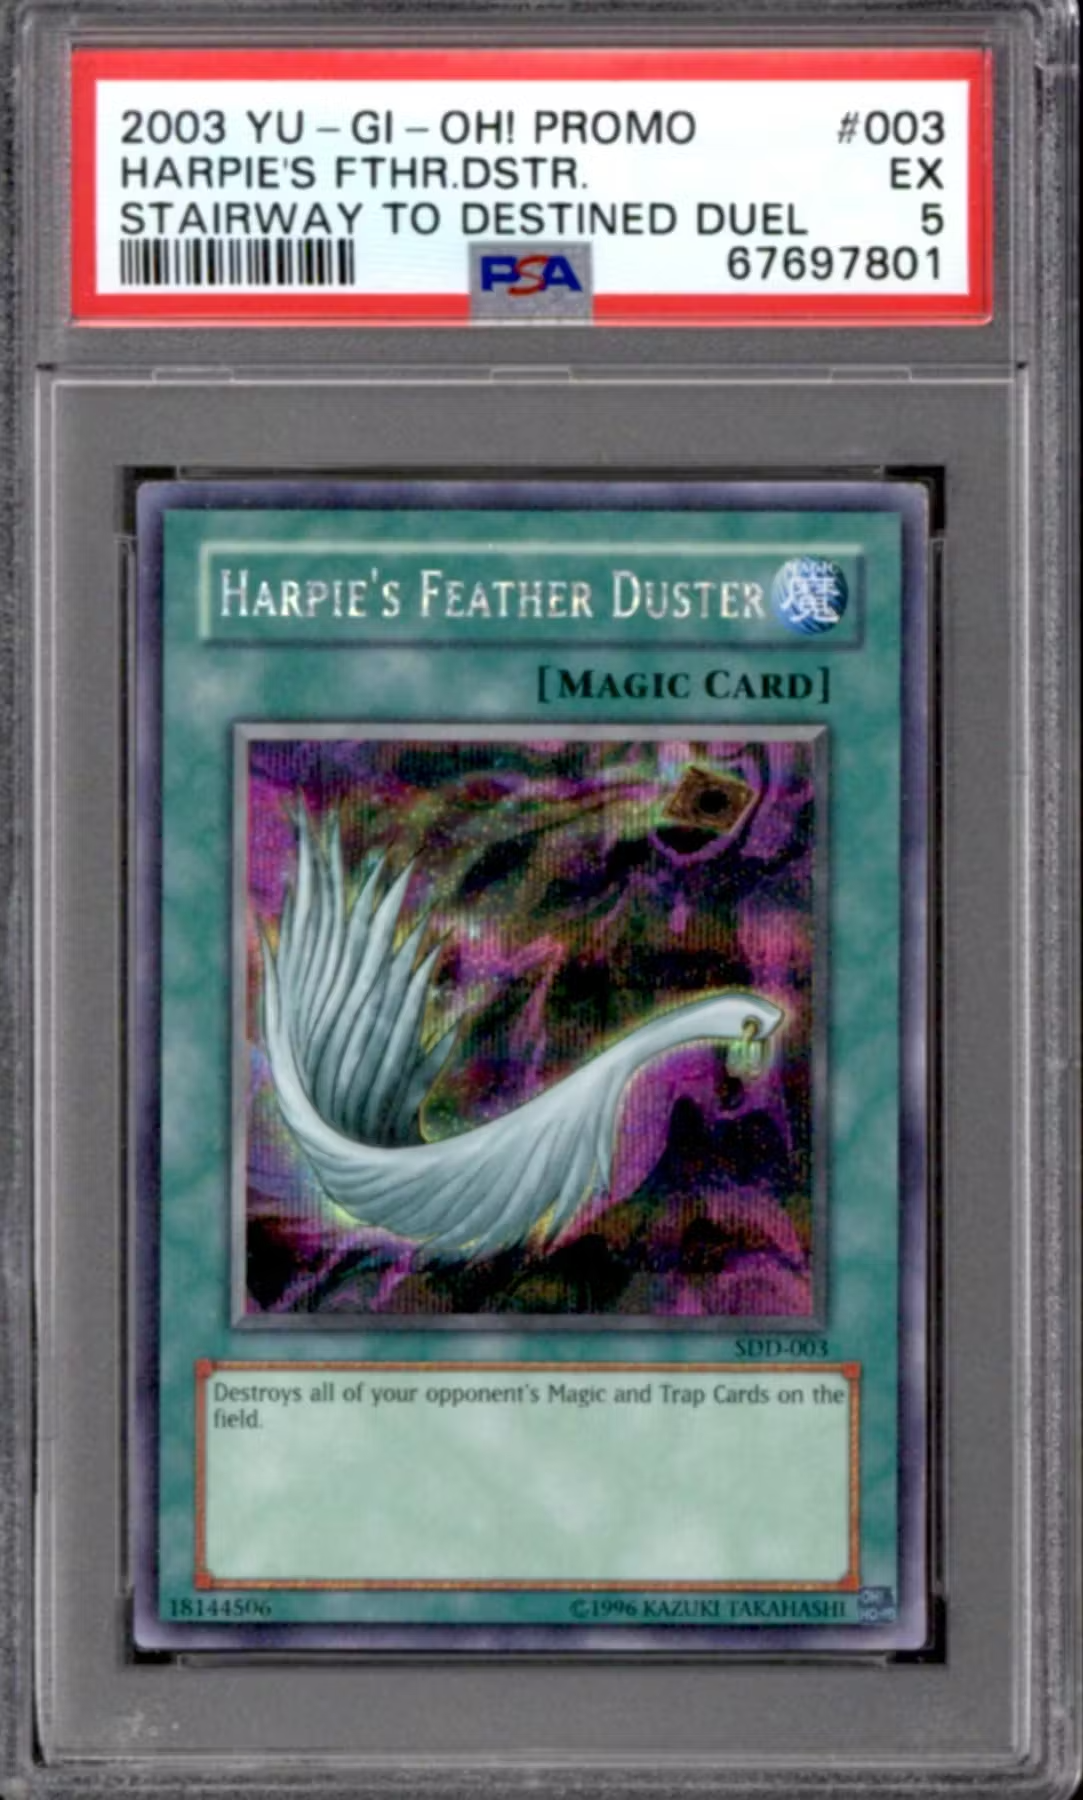 Yugioh Stairway To The Destined Duel Promo Harpie's Feather Duster SDD-003 PSA 5